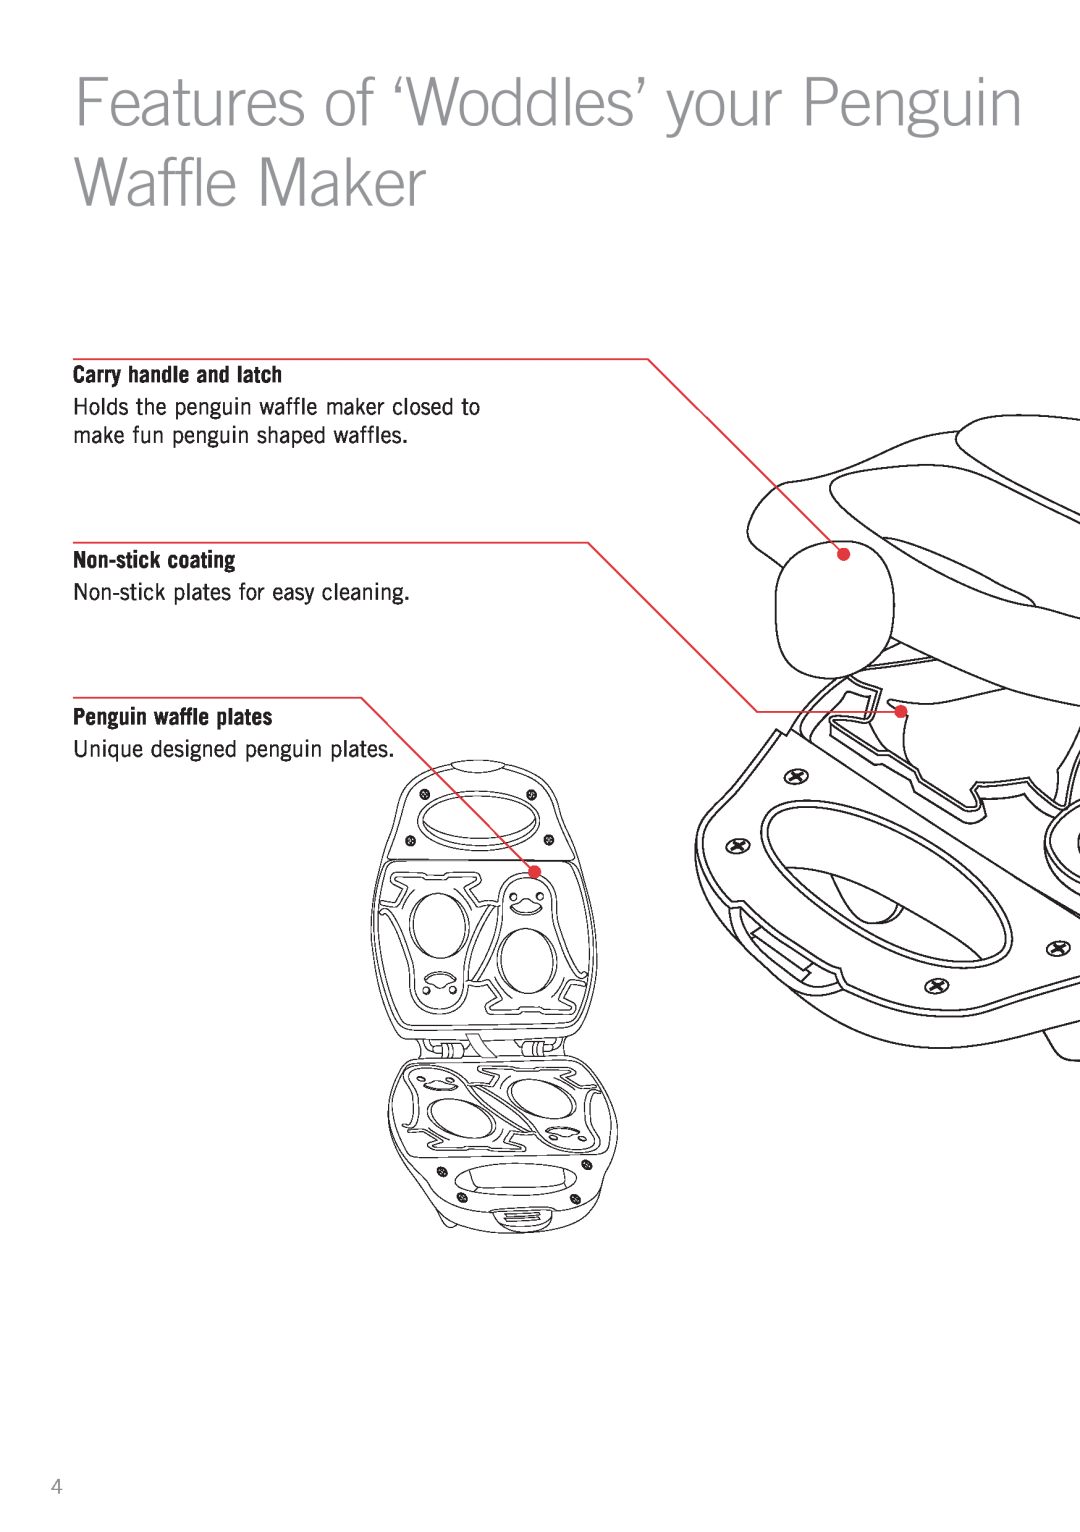 Sunbeam WM3100 manual Features of ‘Woddles’ your Penguin Waffle Maker, Carry handle and latch, Non-stickcoating 